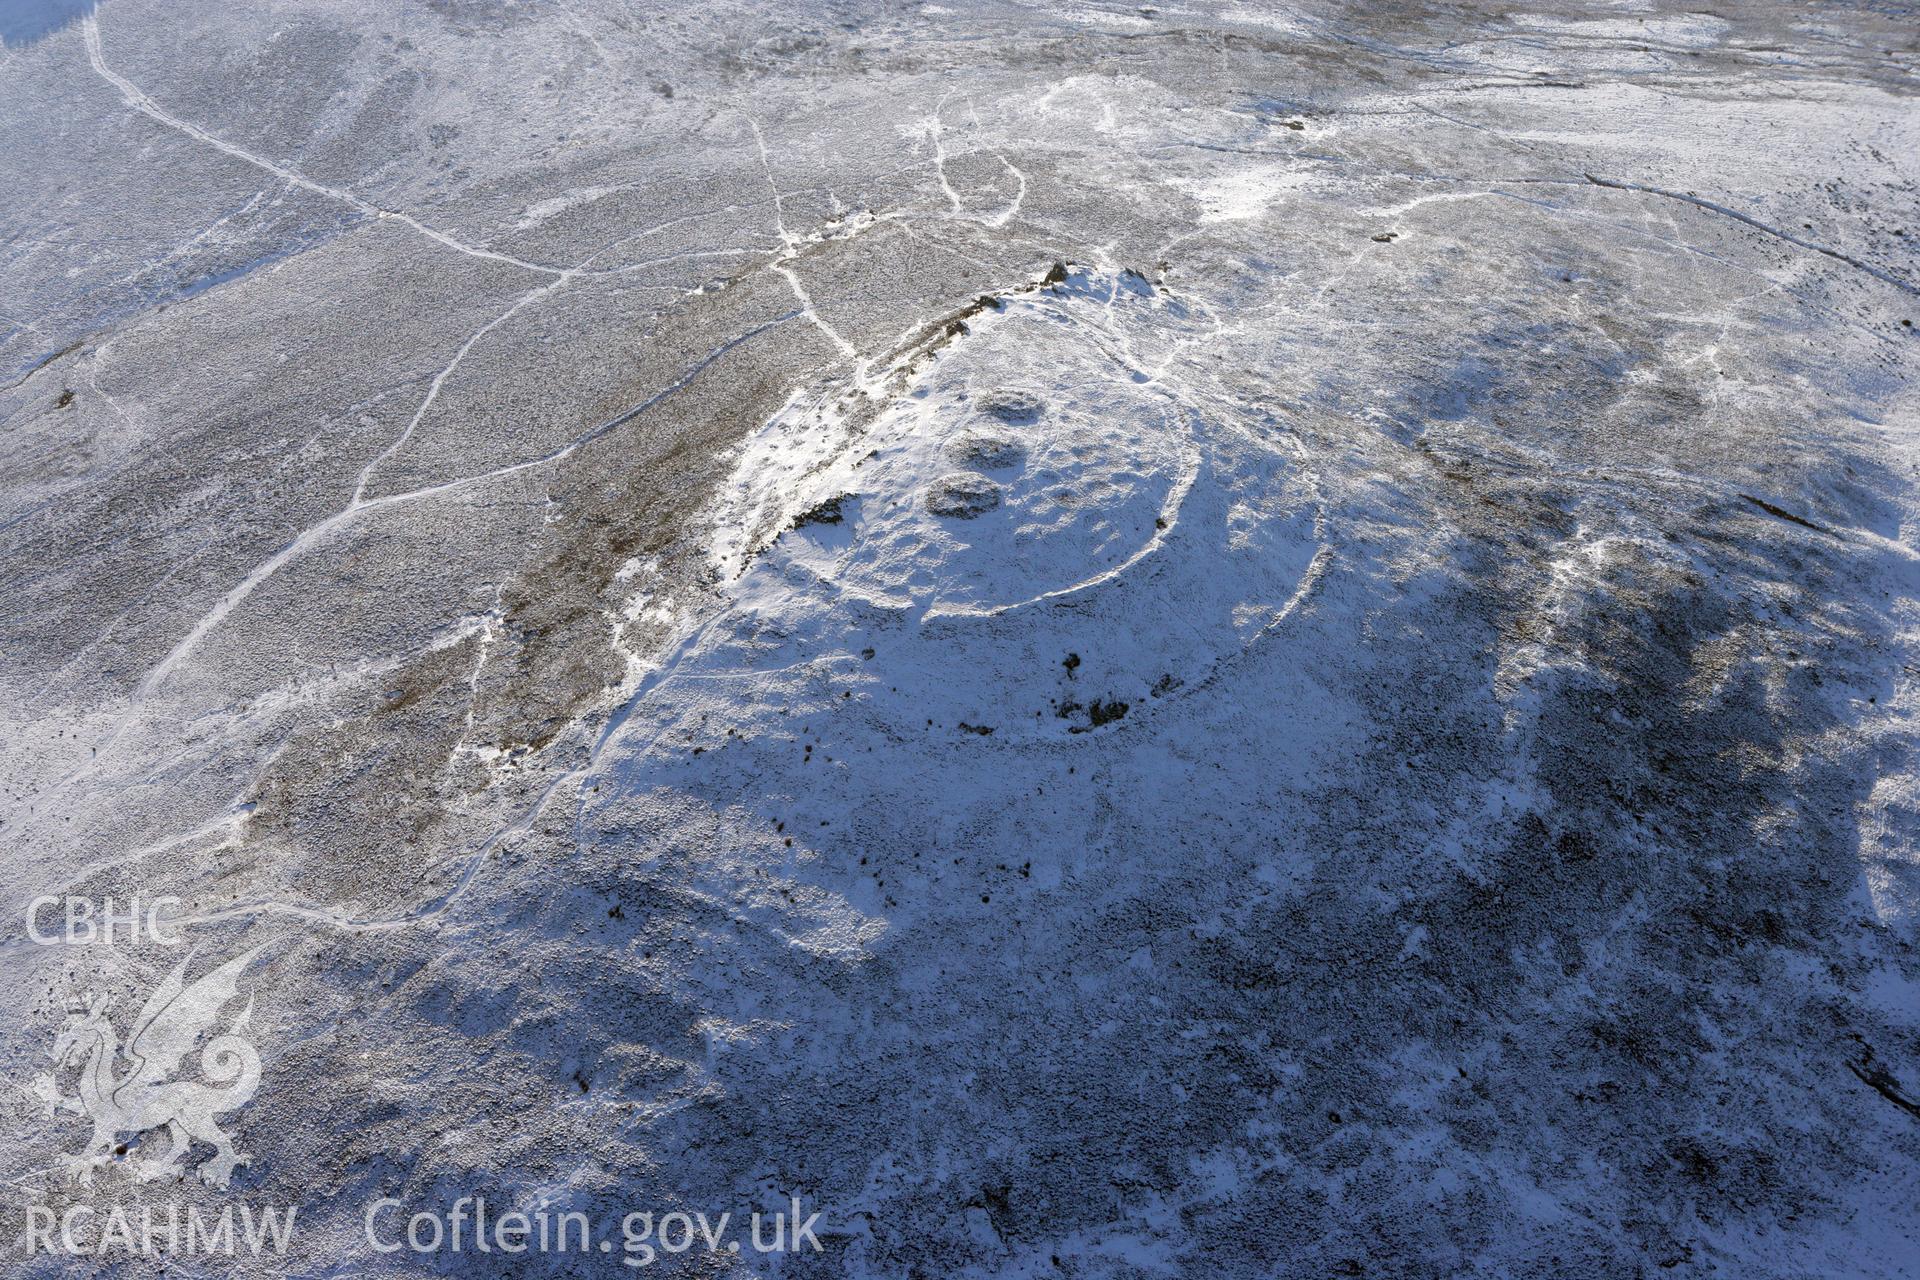 RCAHMW colour oblique aerial photograph of Foel Drygarn hillfort under snow, by Toby Driver, 01/12/2010.